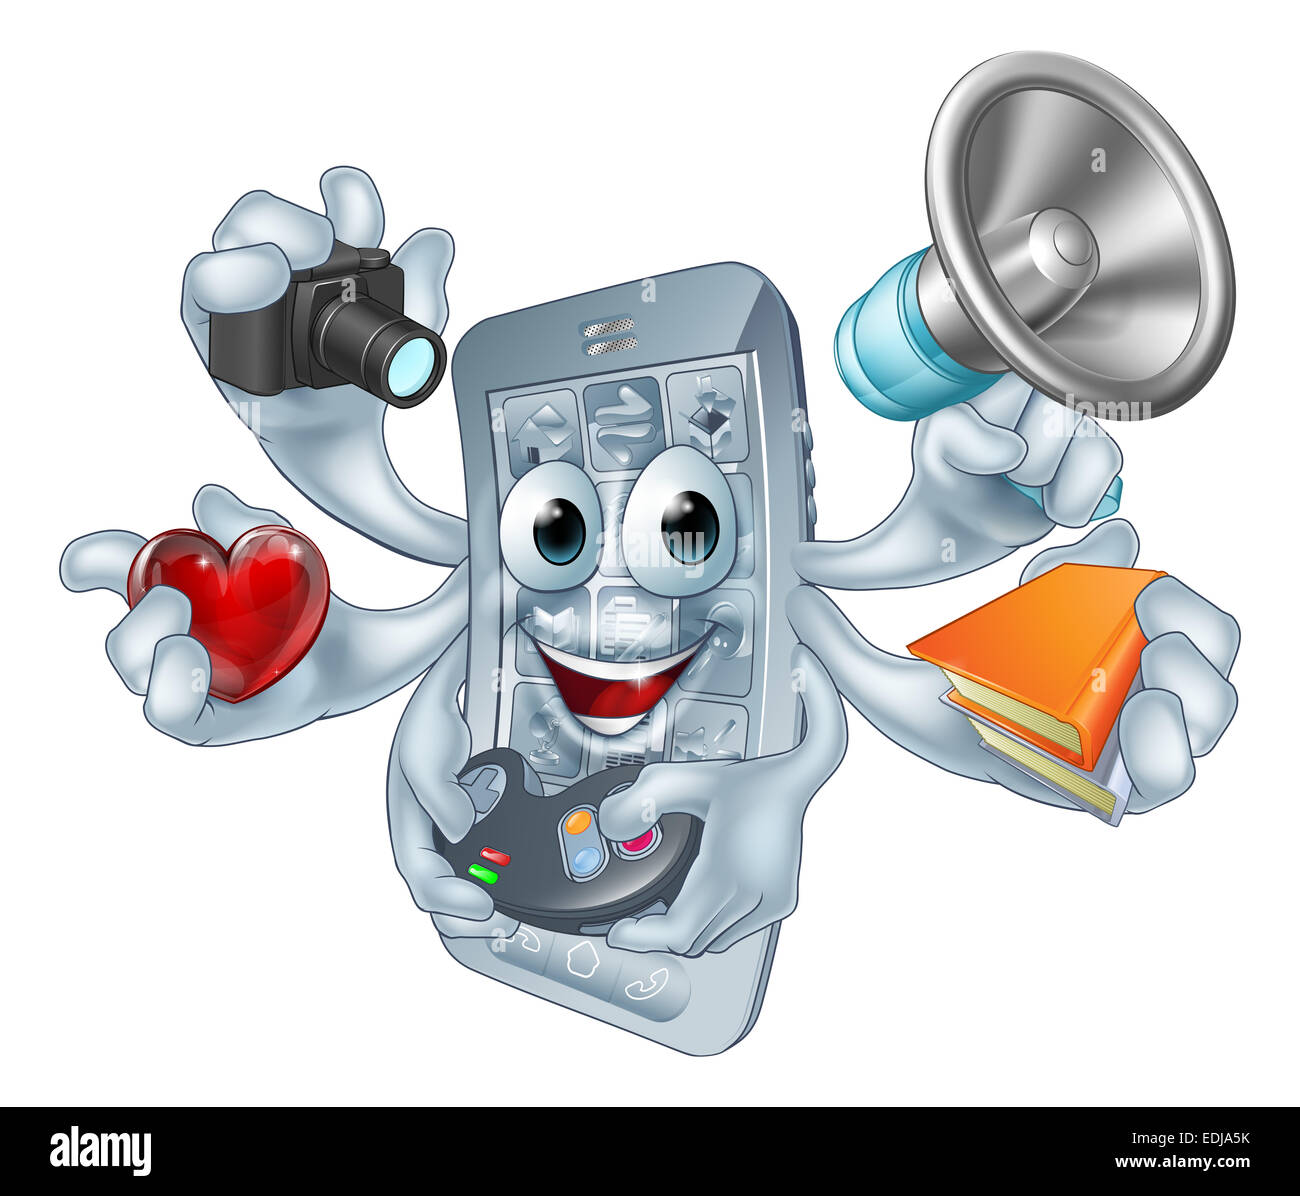 Multitasking phone concept of a cartoon mobile cell phone character performing lots of tasks or running lots of apps Stock Photo